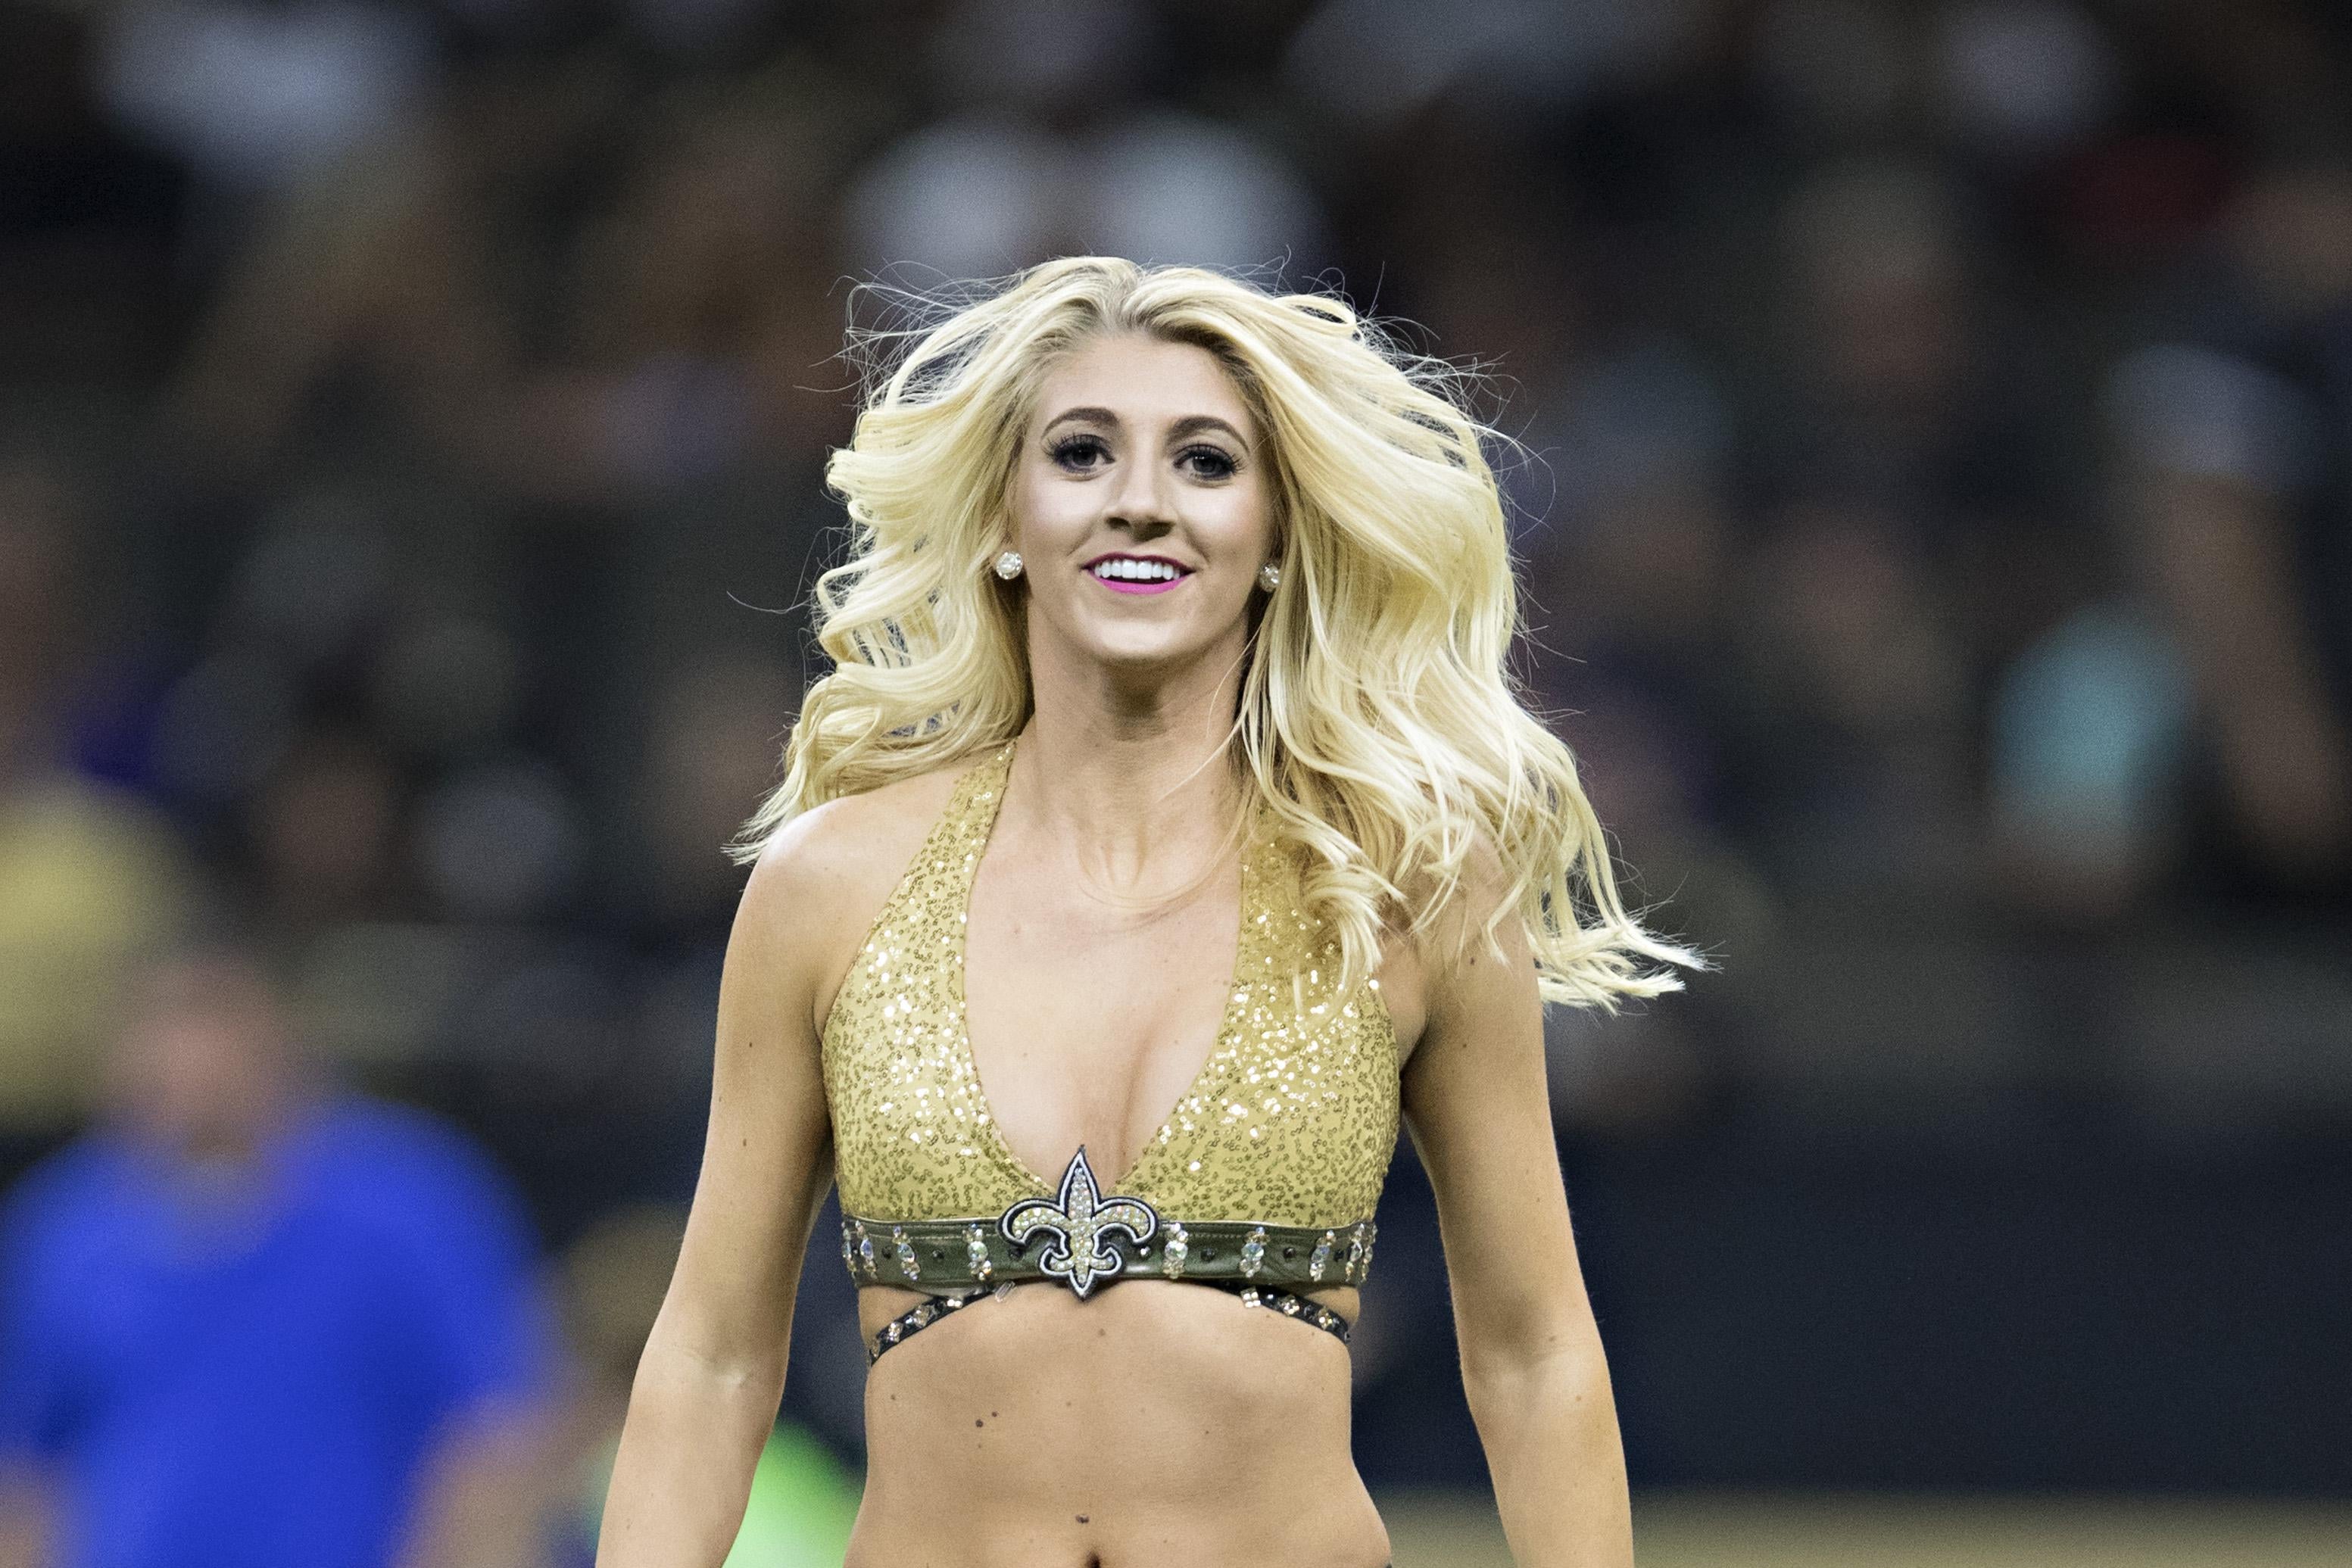 NEW ORLEANS, LA - AUGUST 31:  Saintsations of the New Orleans Saints perform during a preseason game against the Baltimore Ravens at Mercedes-Benz Superdome on August 31, 2017 in New Orleans, Louisiana. The Ravens defeated the Saints 14-13.  (Photo by Wesley Hitt/Getty Images) *** Local Caption ***